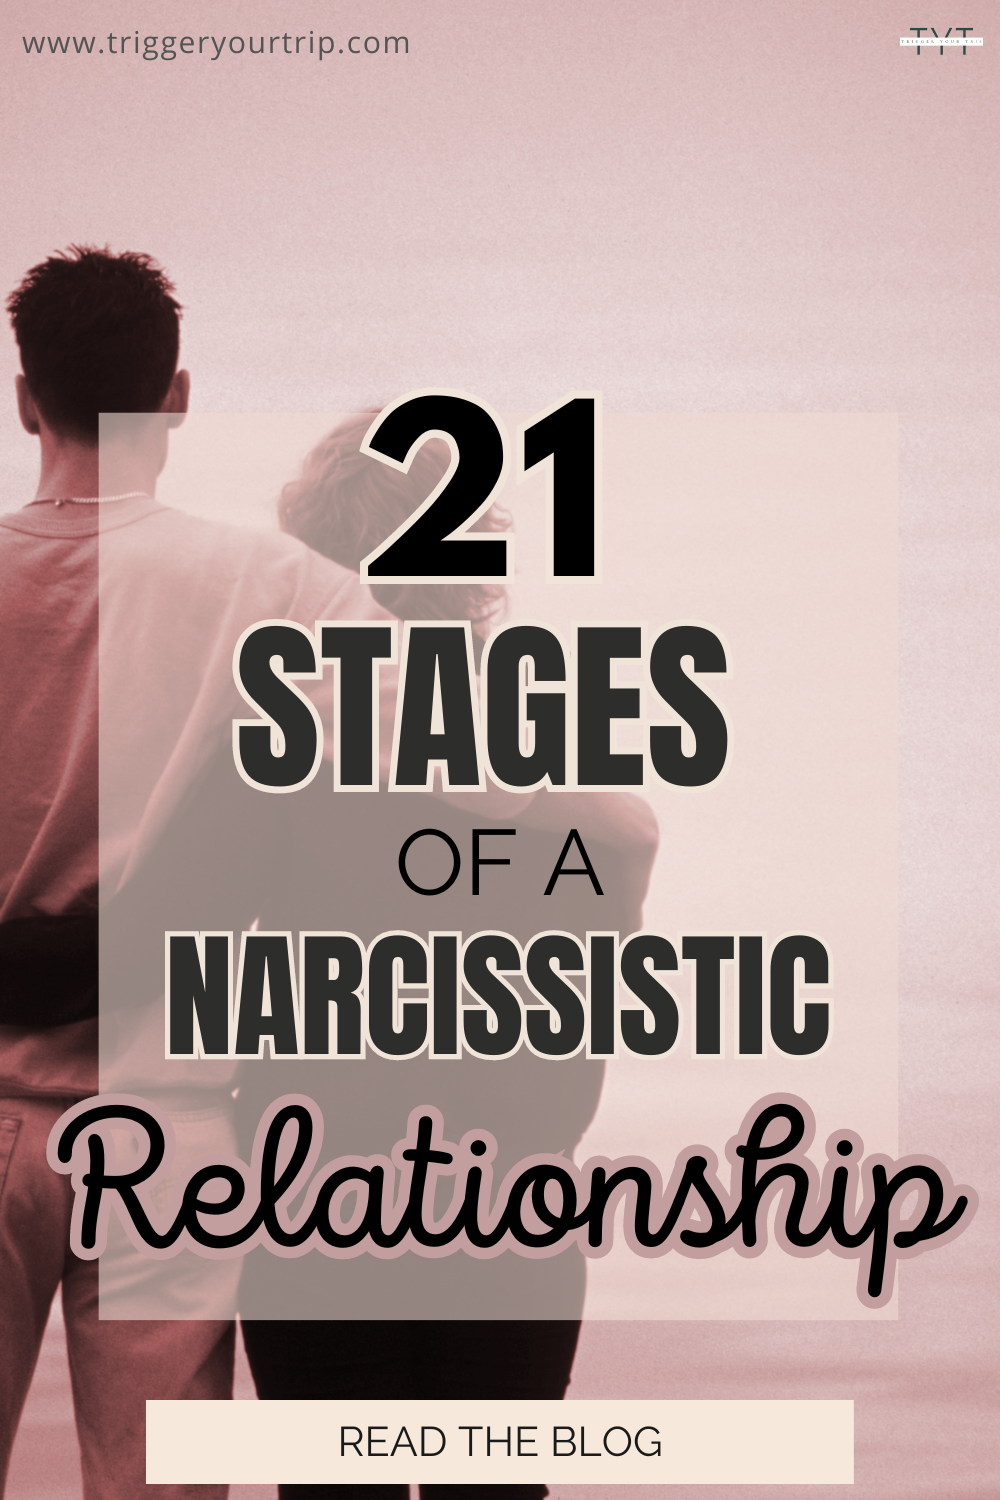 21 stages of a narcissistic relationship: stages of a narcissist and narcissist relationship